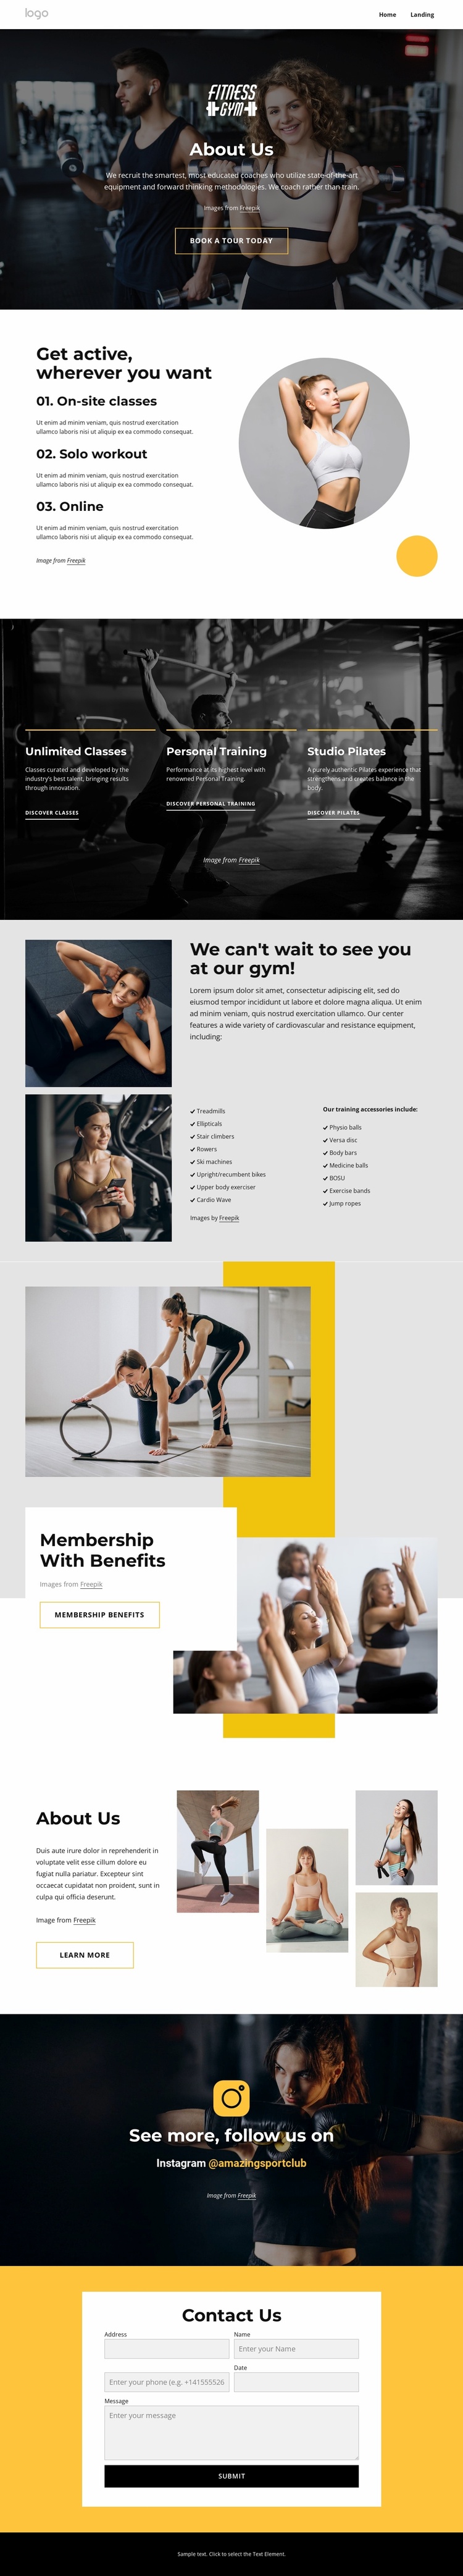 Sport and wellness center eCommerce Template